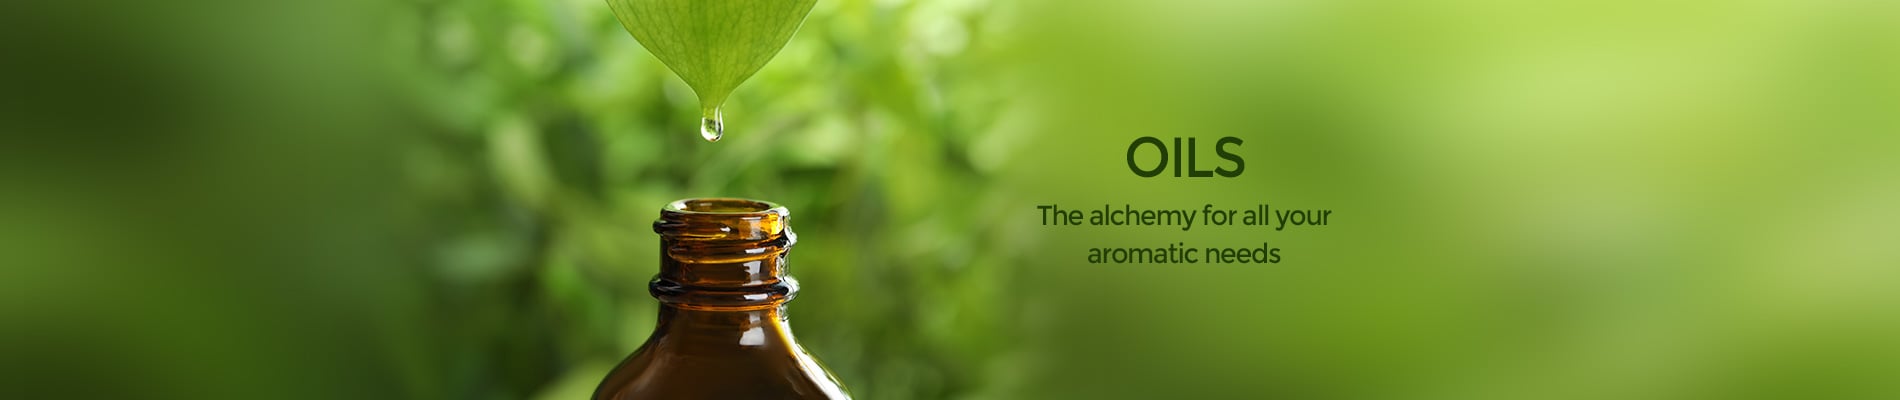 Oil - The alchemy for all your aromatics needs